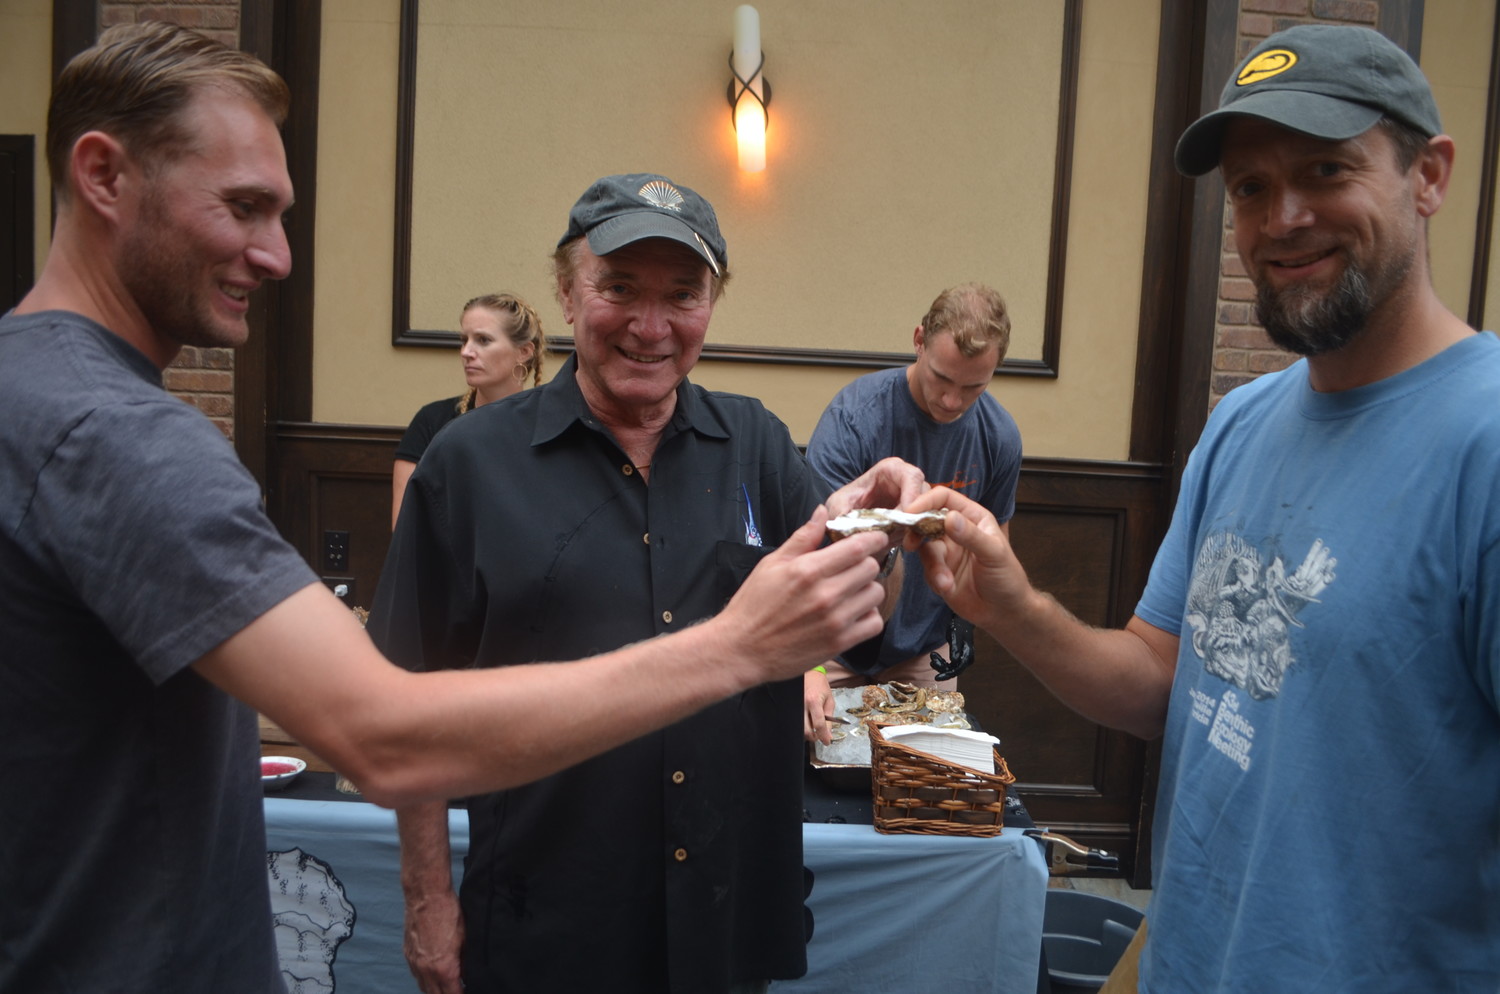 Hempstead Town Biologist Stephen Naham, left, with his father Greg Naham and Adelphi University Marine Biology Professor Aaren Freeman at the Oyster Fest kickoff launch party at JJ Coopers on Aug. 14.